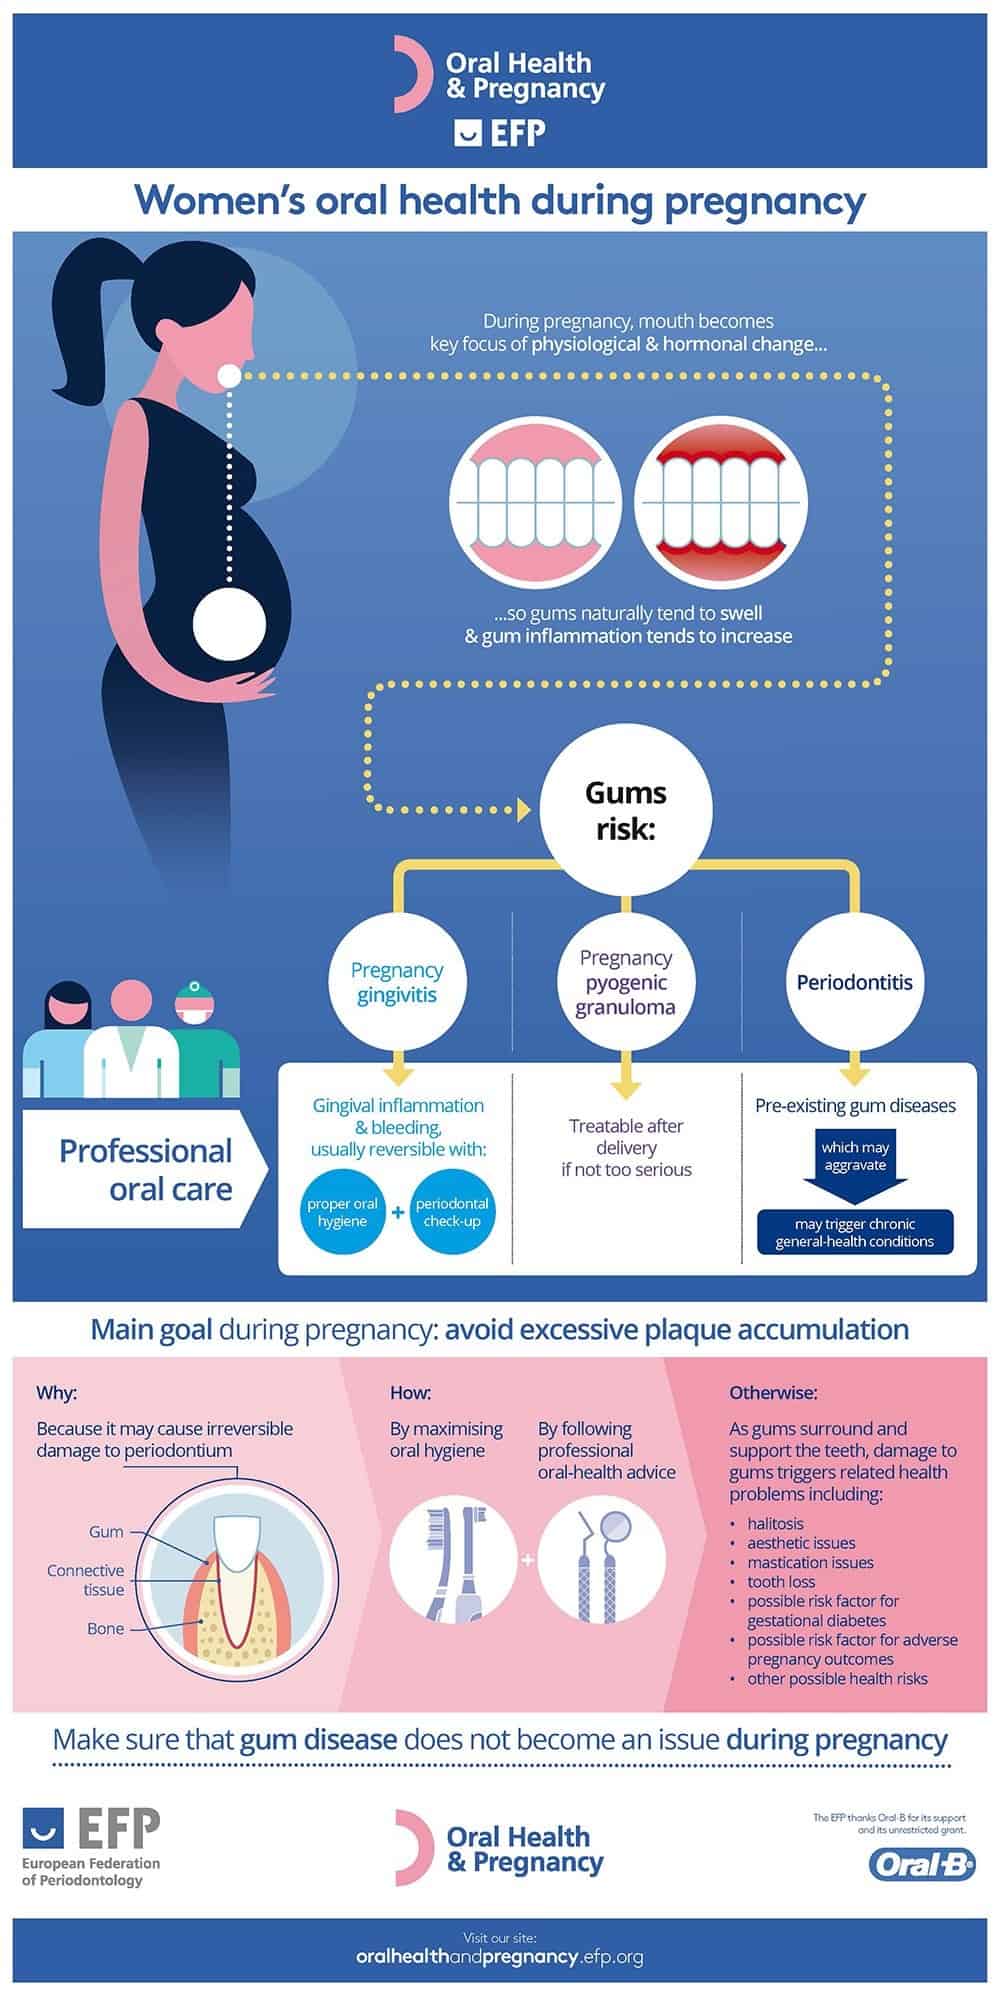 Oral Health & Pregnancy Image from EFP